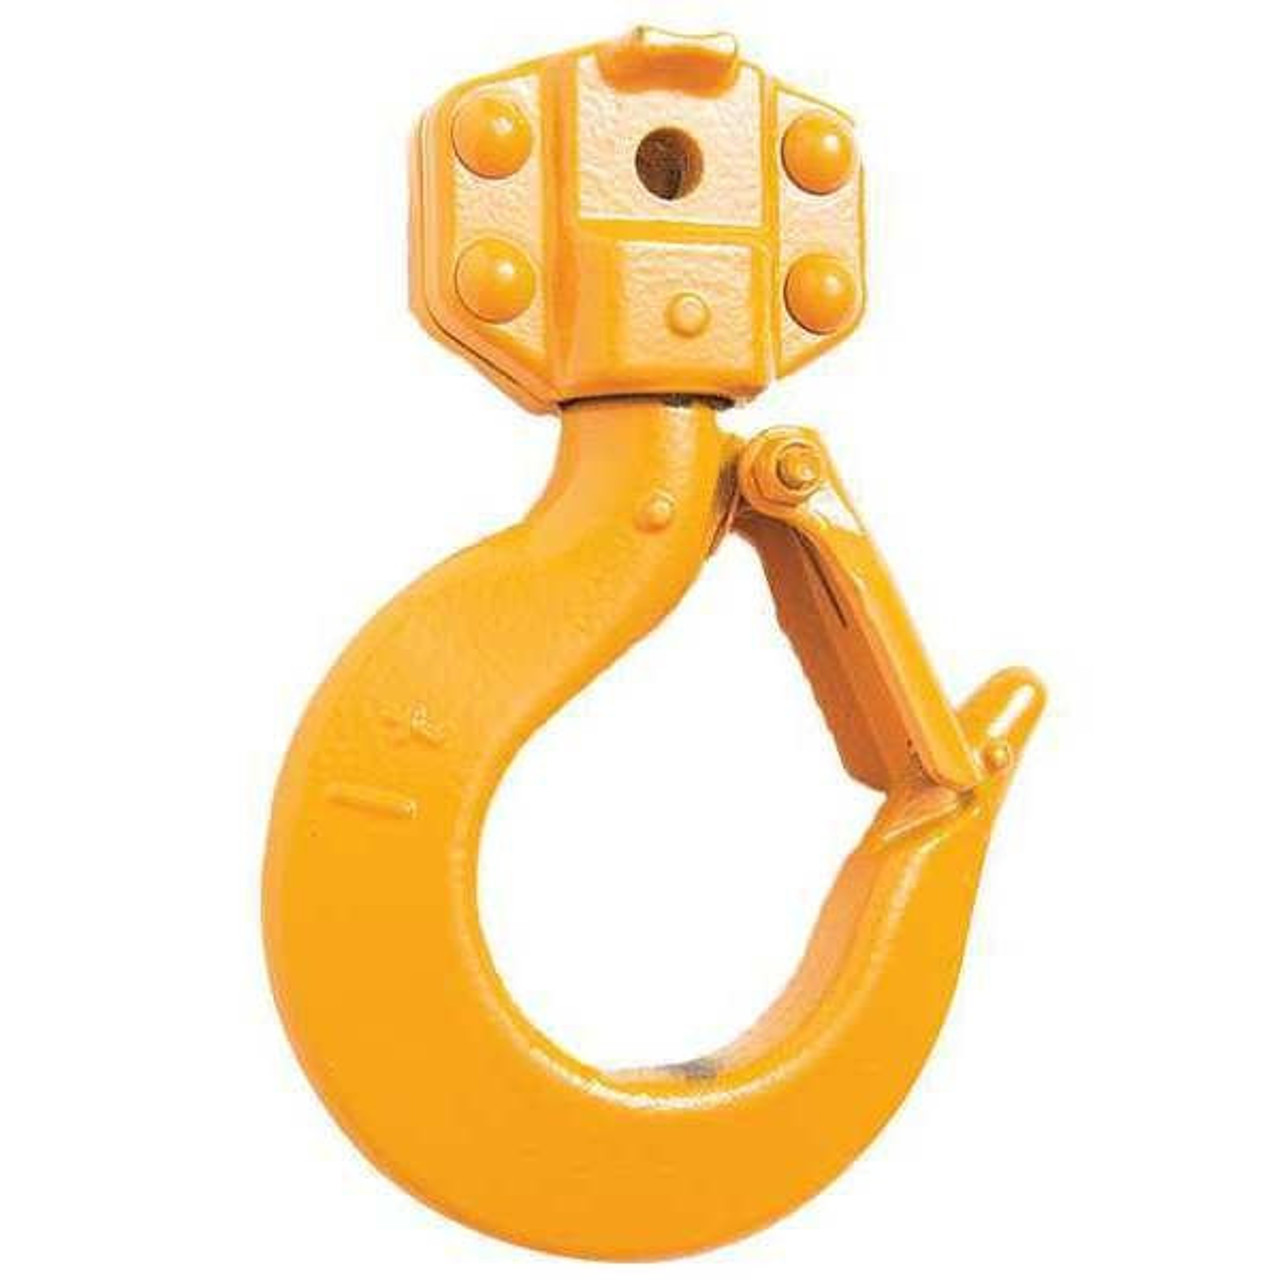 Bottom Hook, Product Type Bottom Hook, Compatible Hoist Type Lever Chain Hoists, Compatible Load Capacity 2,000 lb, Compatible Series L5LB, Material Carbon Steel, Overall Length Not Applicable, Overall Width 3.7 in, Overall Height Not Applicable, Includes Safety Latch